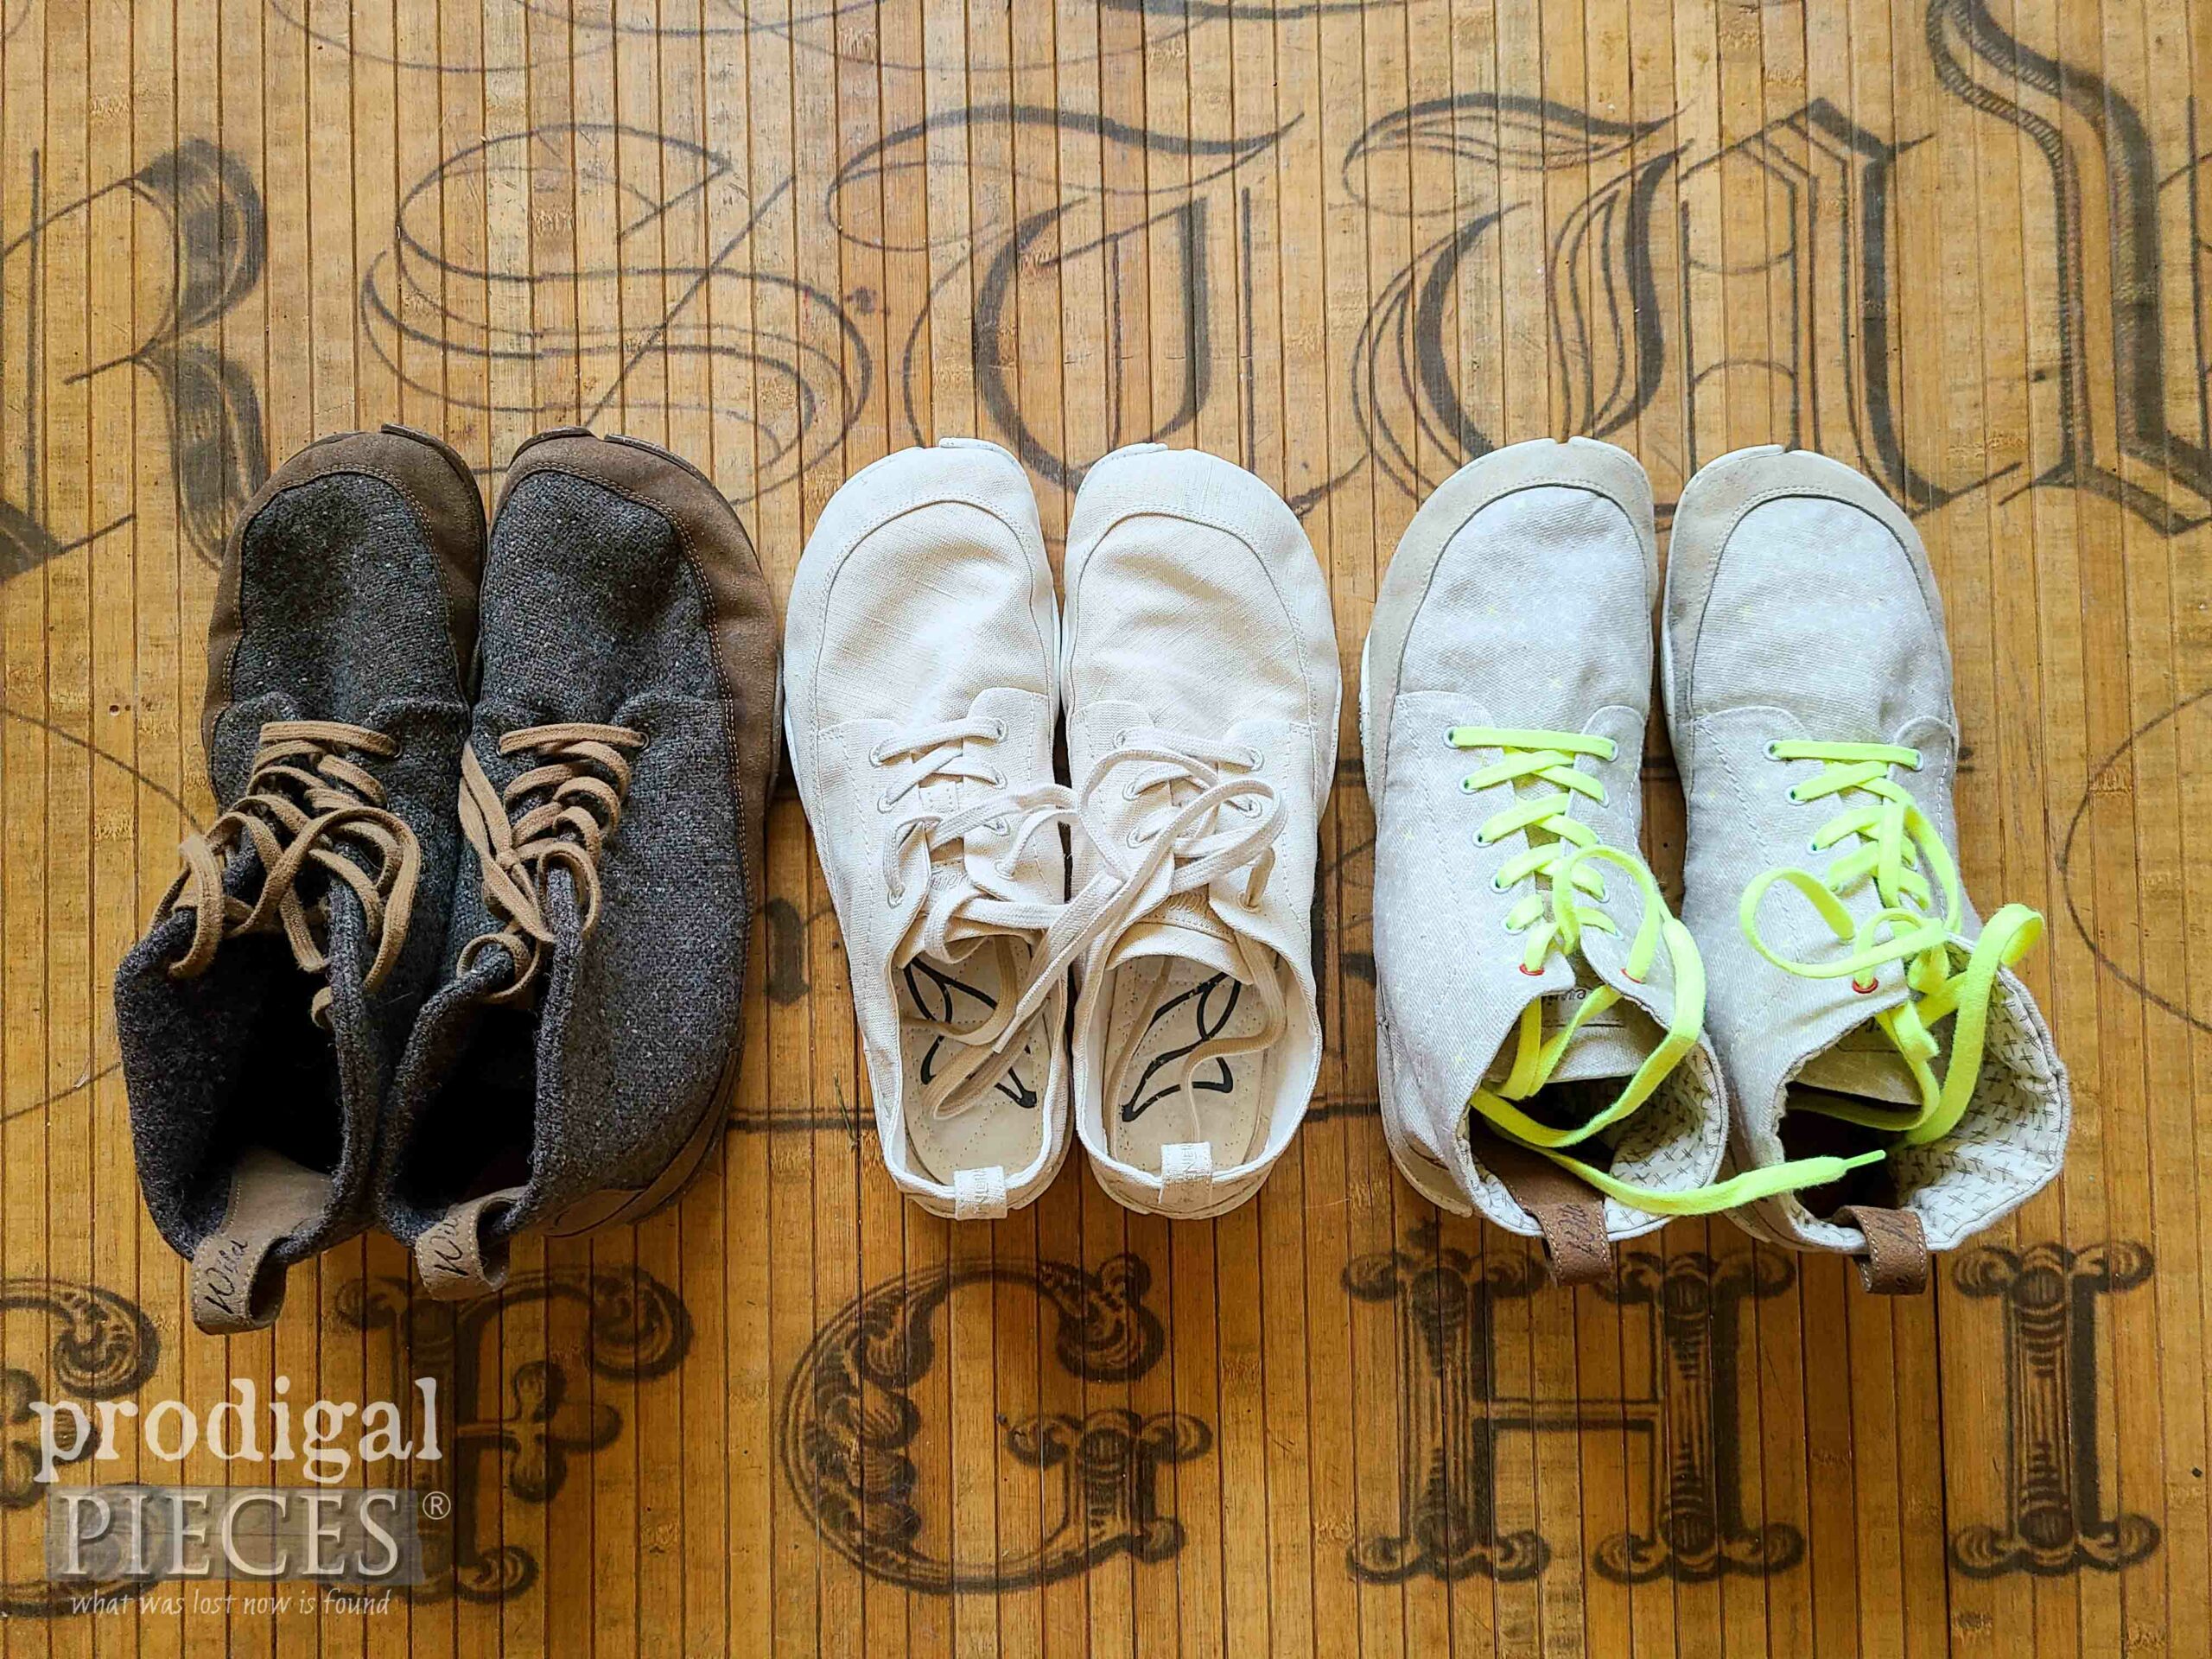 Wilding Shoes Selection Owned by Larissa of Prodigal Pieces | prodigalpieces.com #prodigalpieces